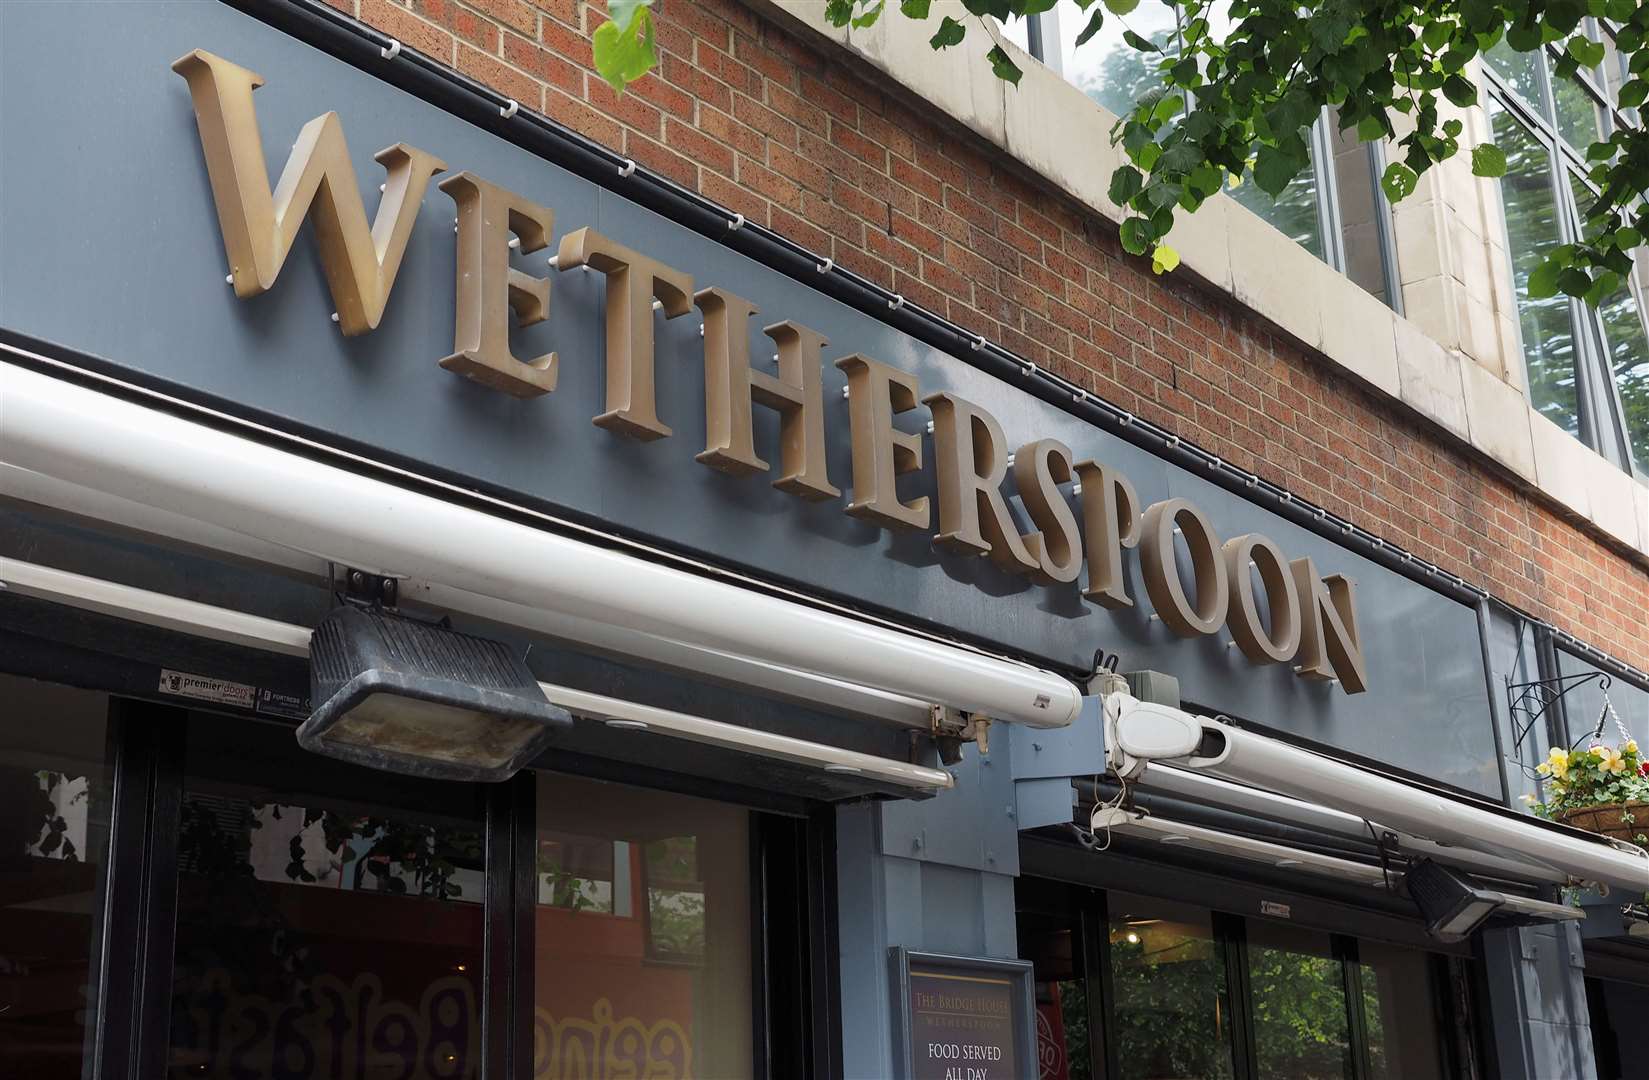 There are 844 pubs owned by J D Wetherspoon in the UK